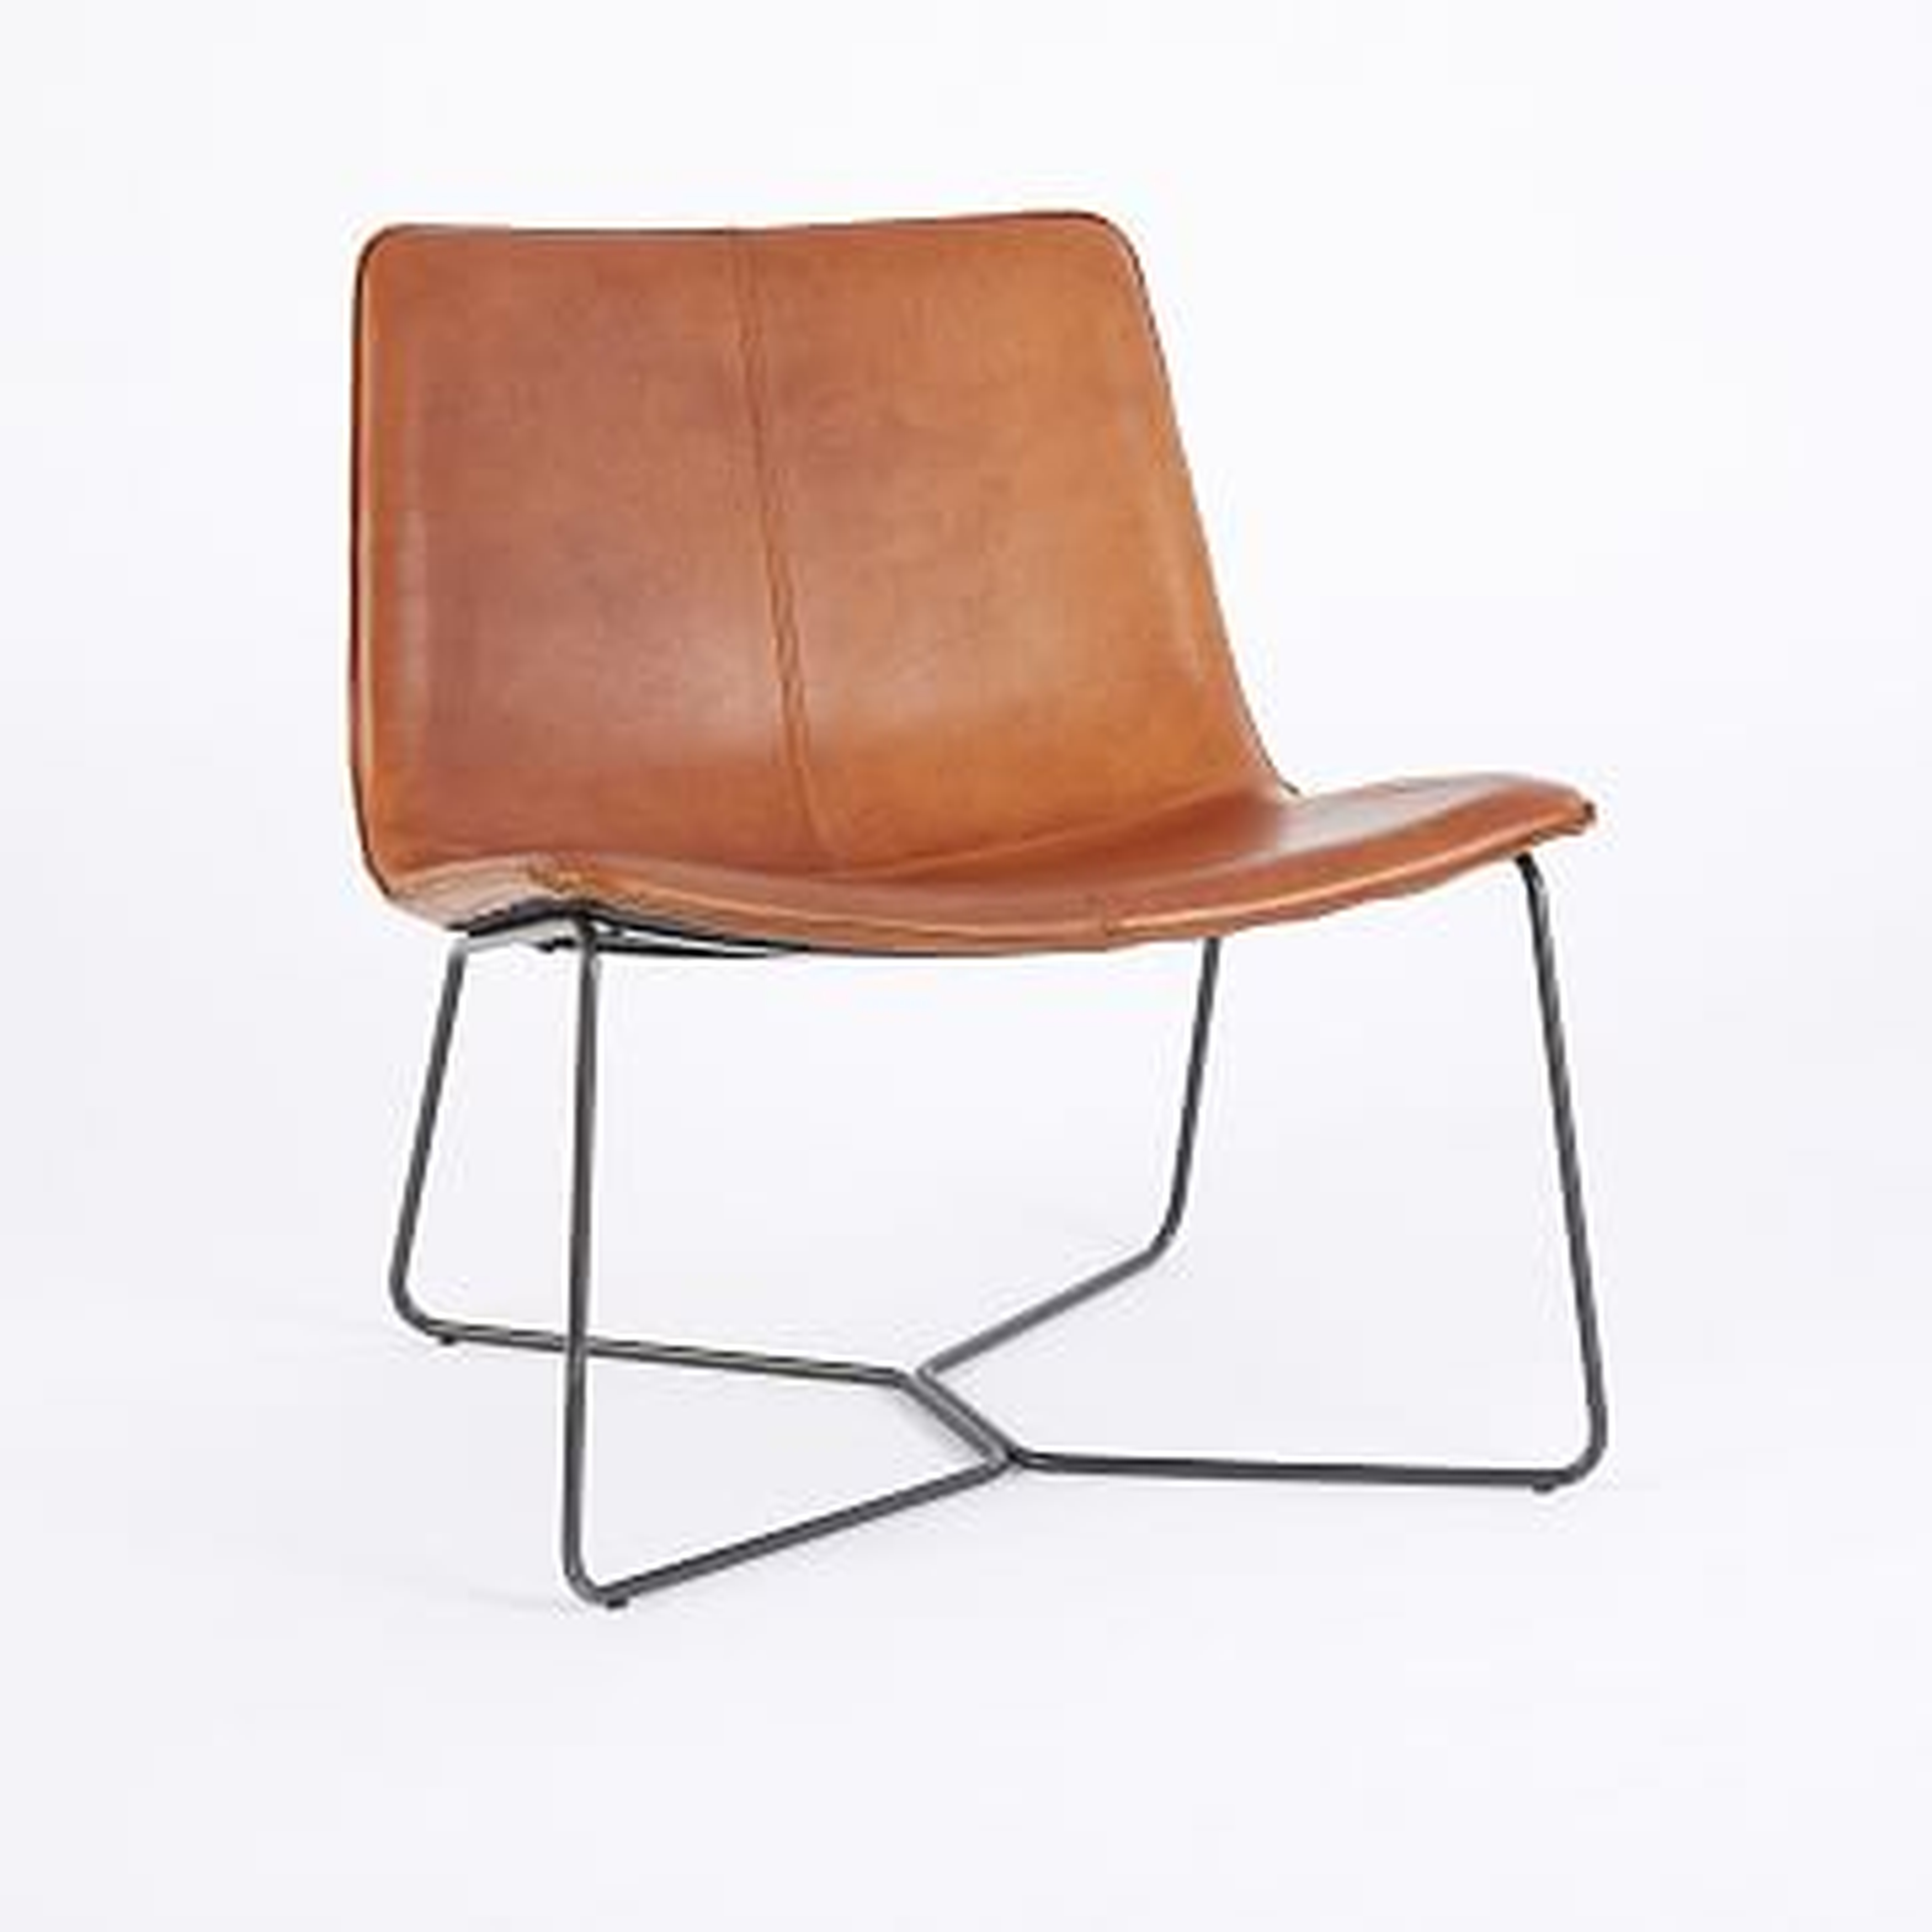 Slope Leather Lounge Chair, Saddle Leather, Nut, Charcoal, UPS - West Elm